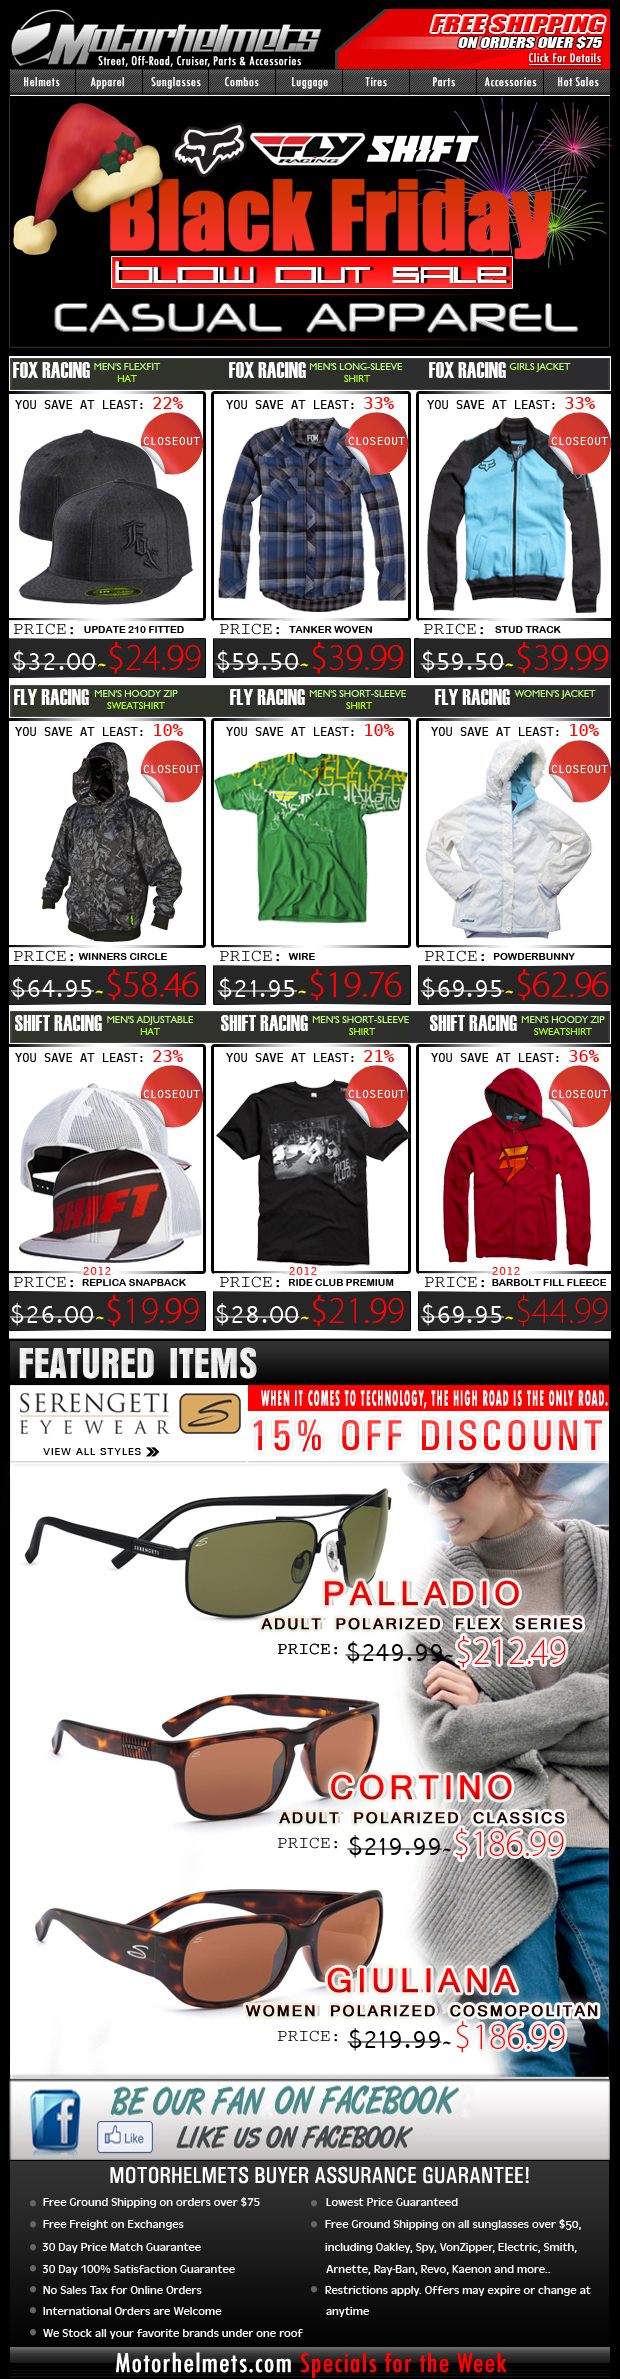 Countdown to Black Friday SALE: Fox, Fly, Shift Closeouts!